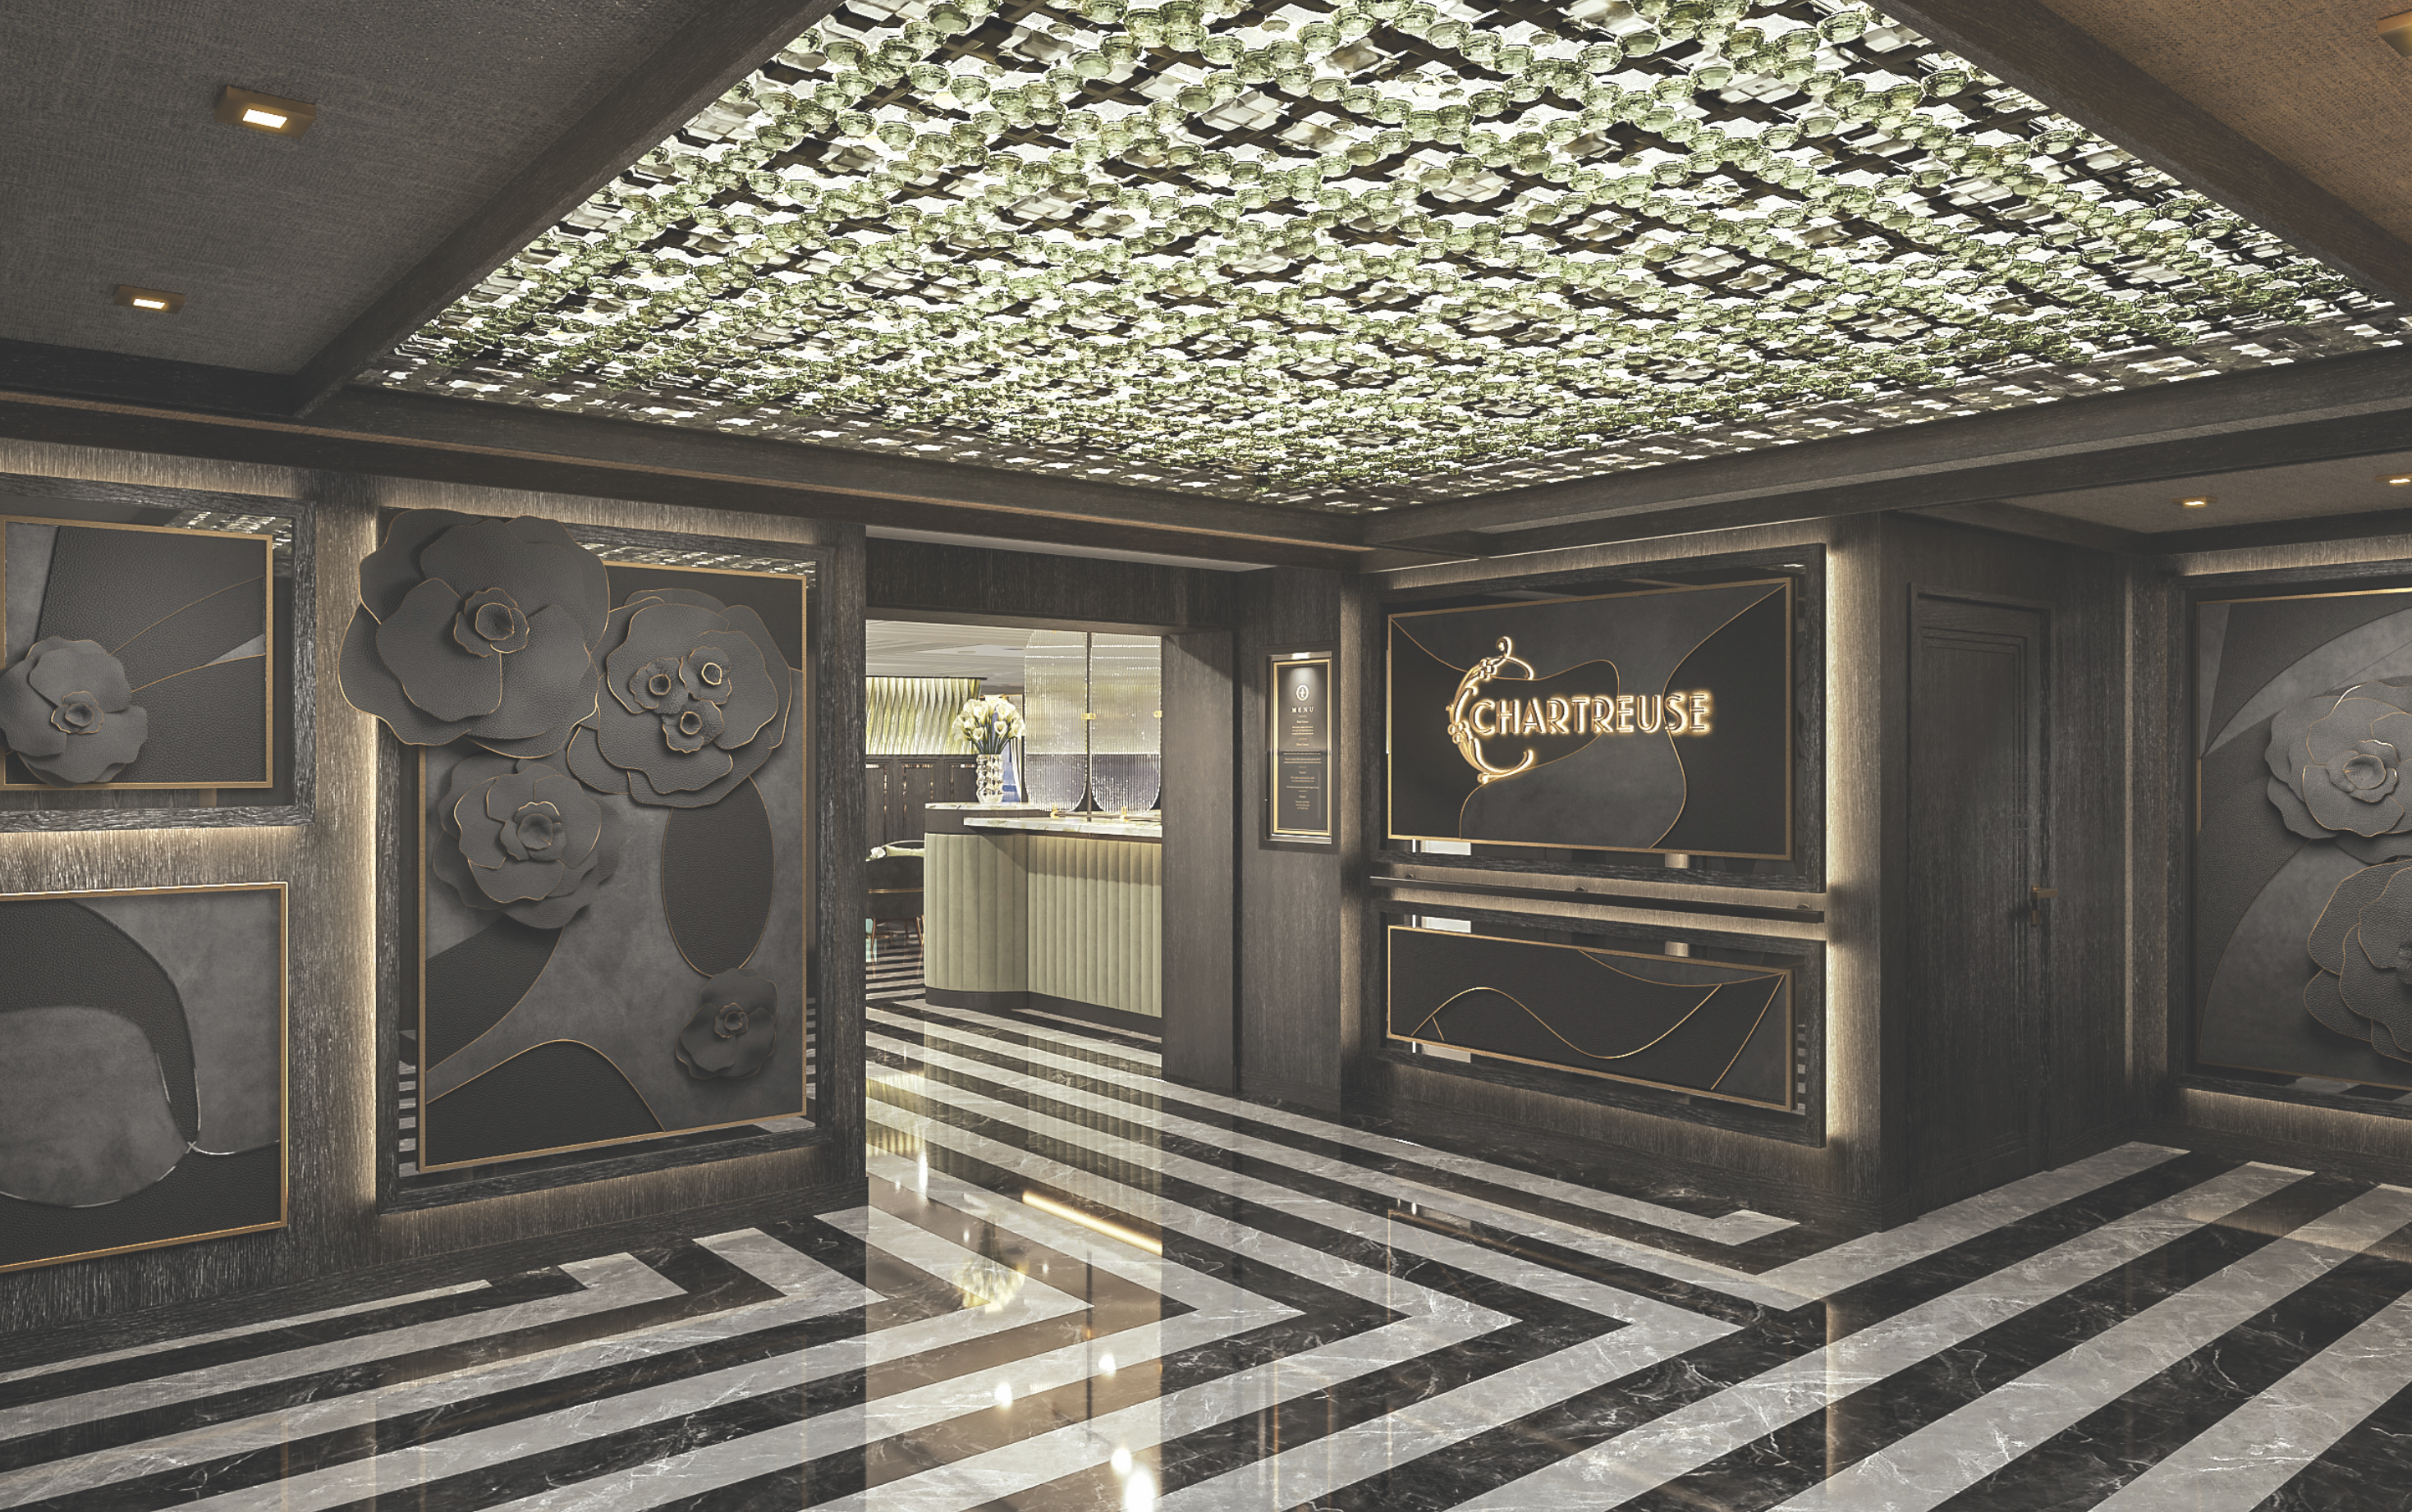 The stunning entrance of Chartreuse on Seven Seas Grandeur